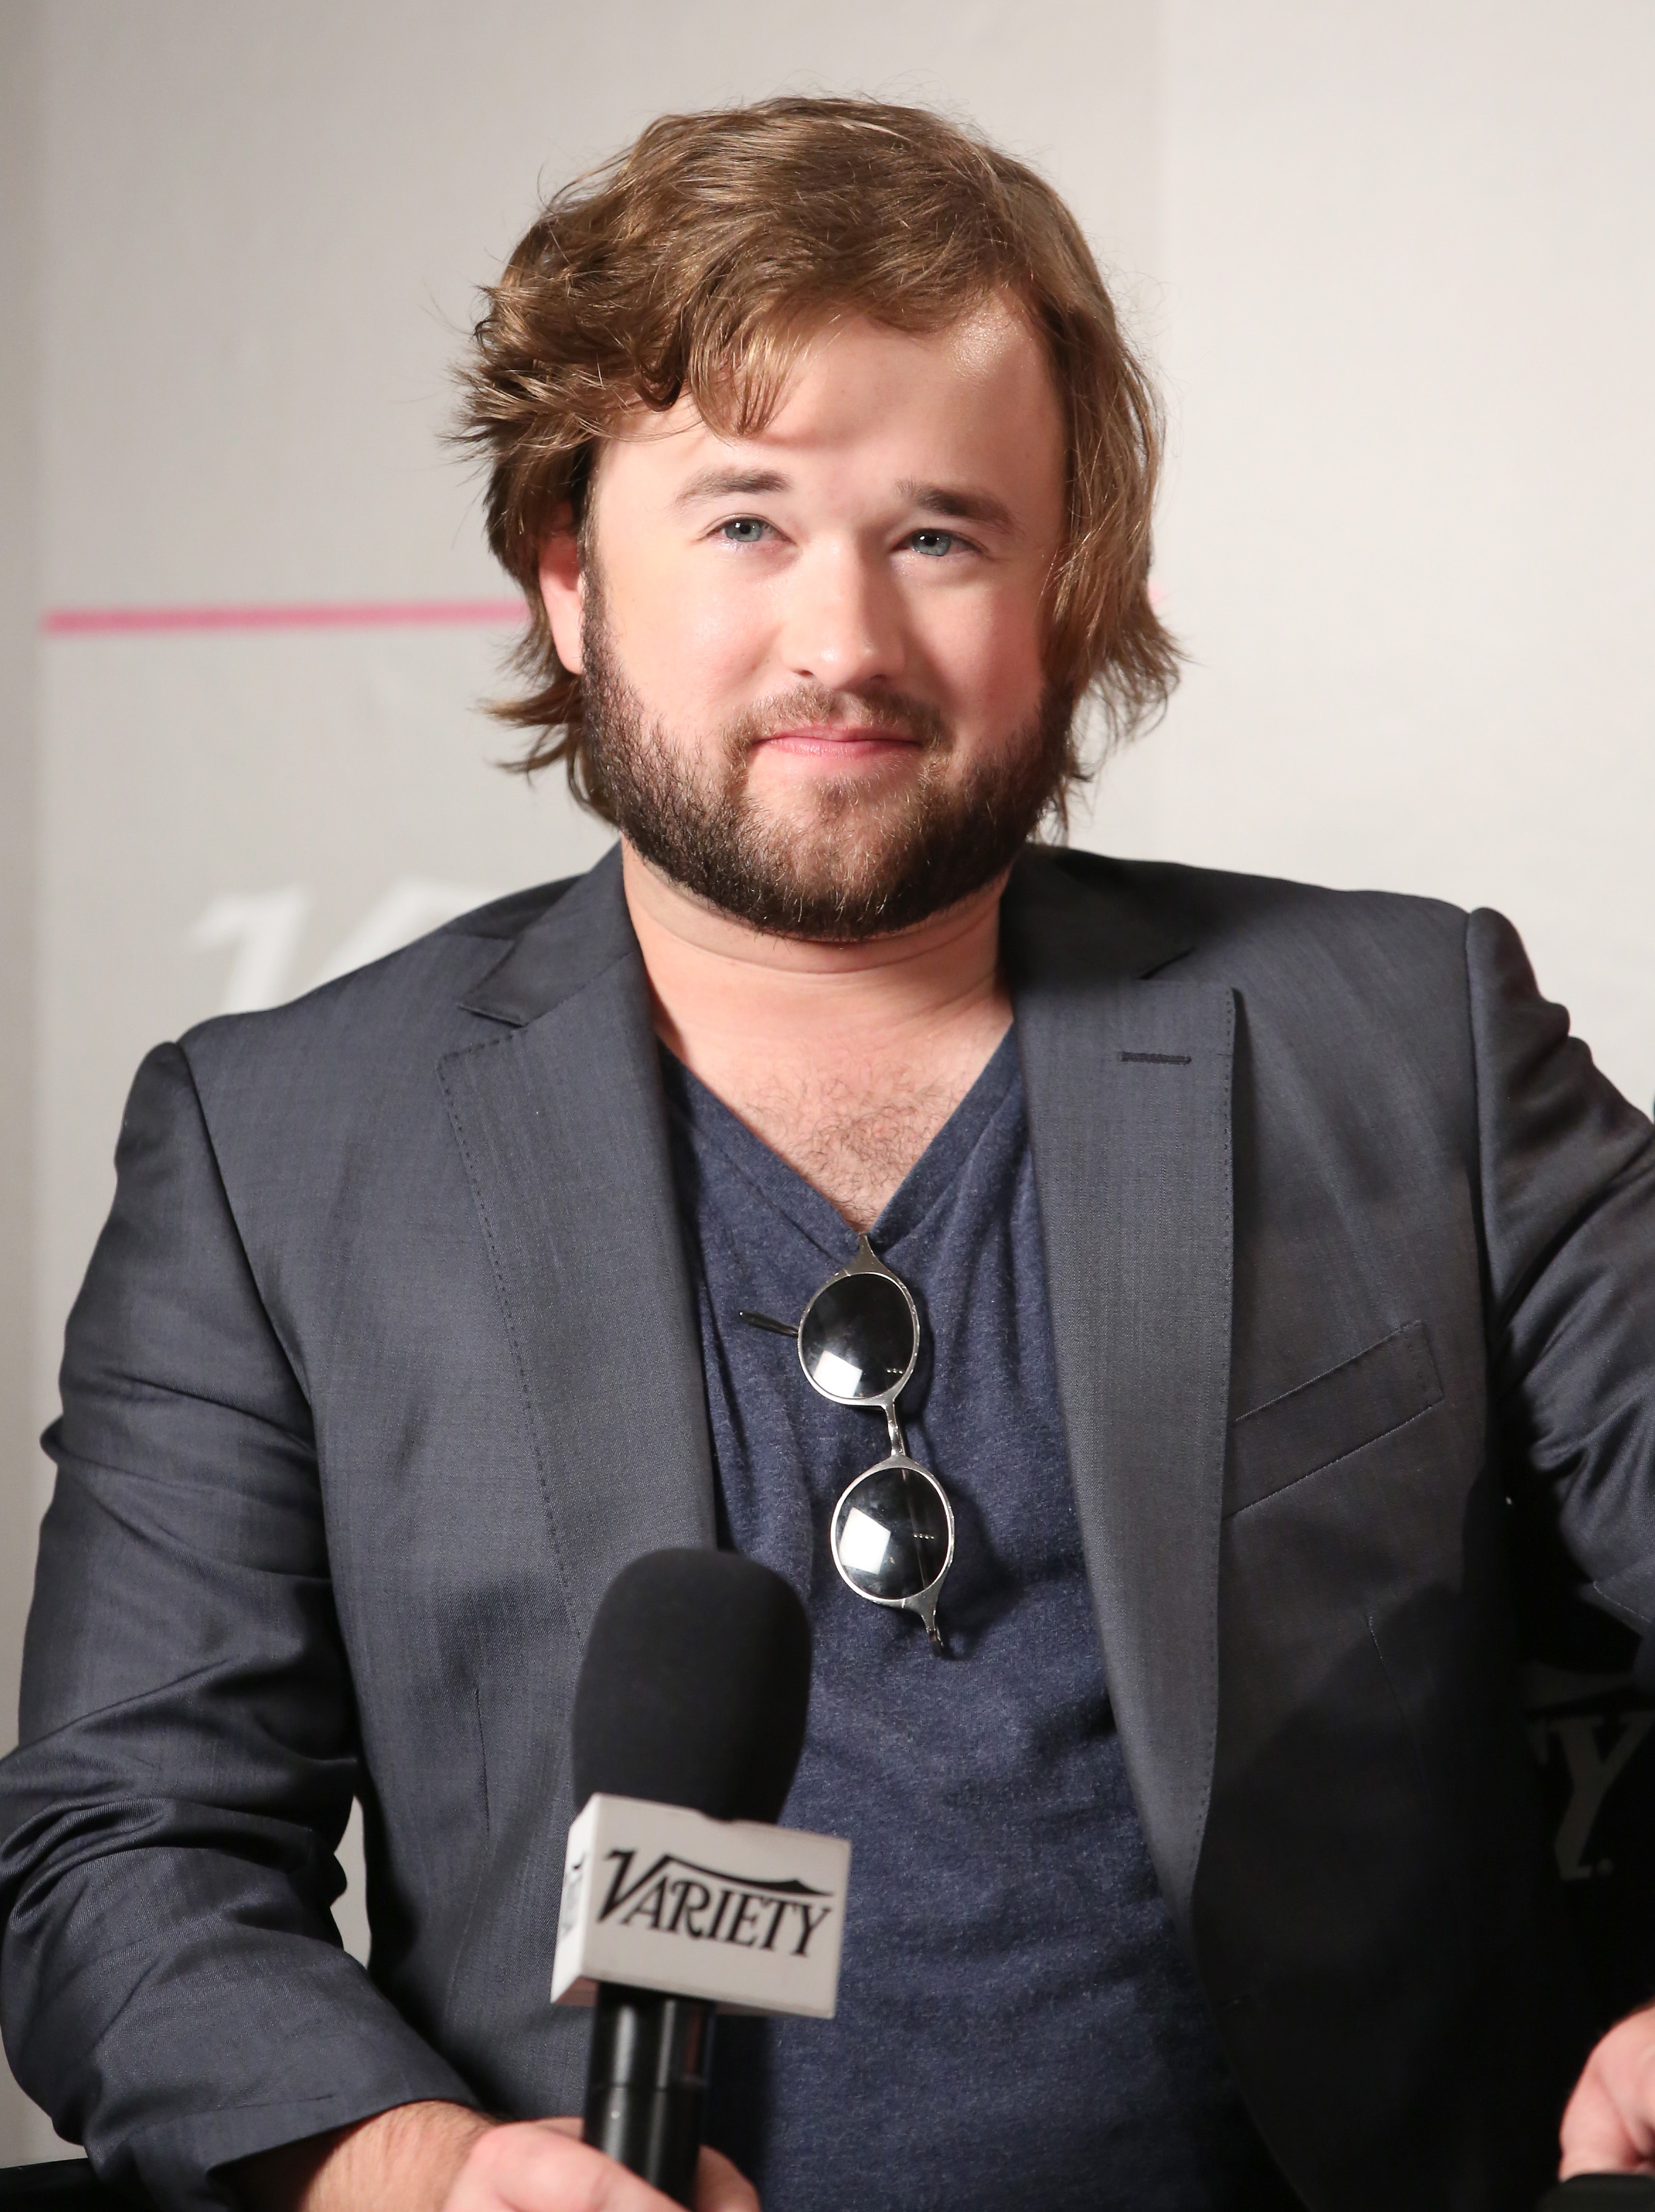 Haley Joel Osment attends the Variety Studio at Holt Renfrew during the 2014 Toronto International Film Festival on September 7, 2014 in Toronto, Canada. | Source: Getty Images